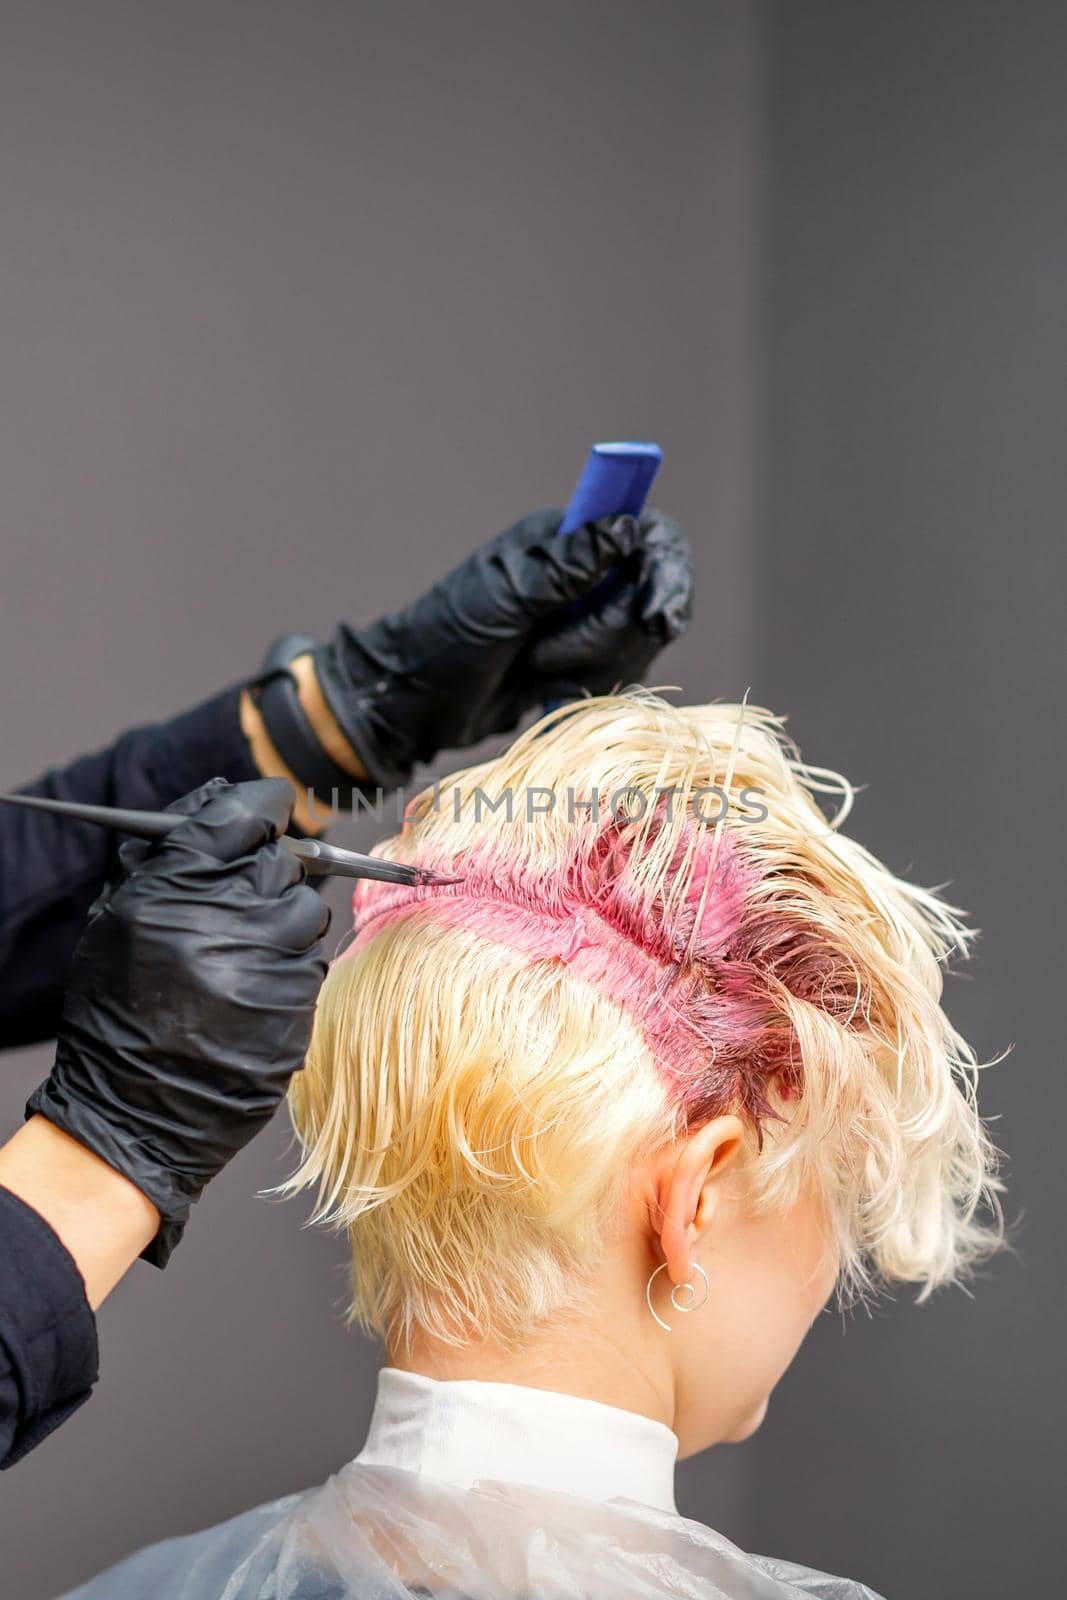 Hairdresser colors female blonde hair in pink color at a beauty salon. by okskukuruza